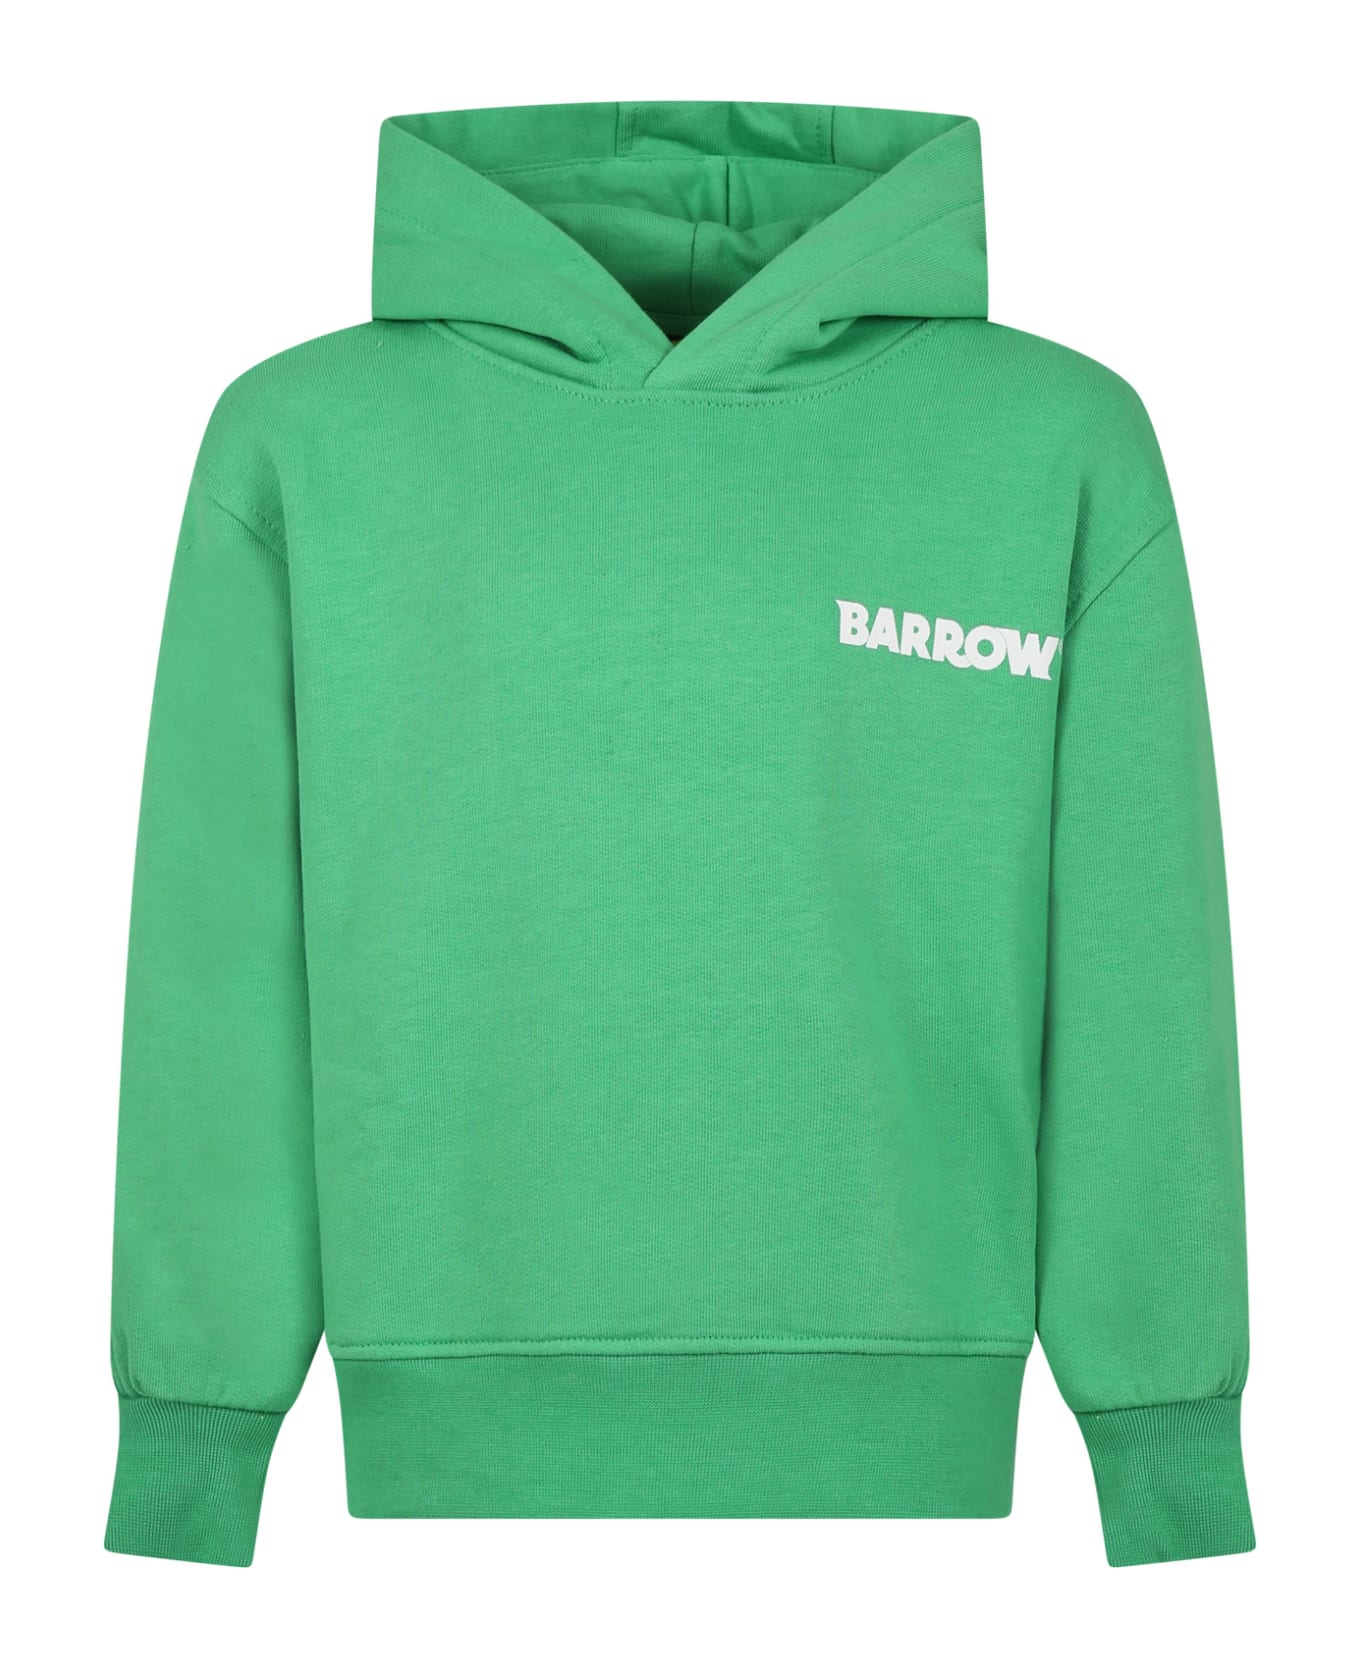 Barrow Green Sweatshirt For Kids With Logo And Iconic Smiley Face - Fern Green